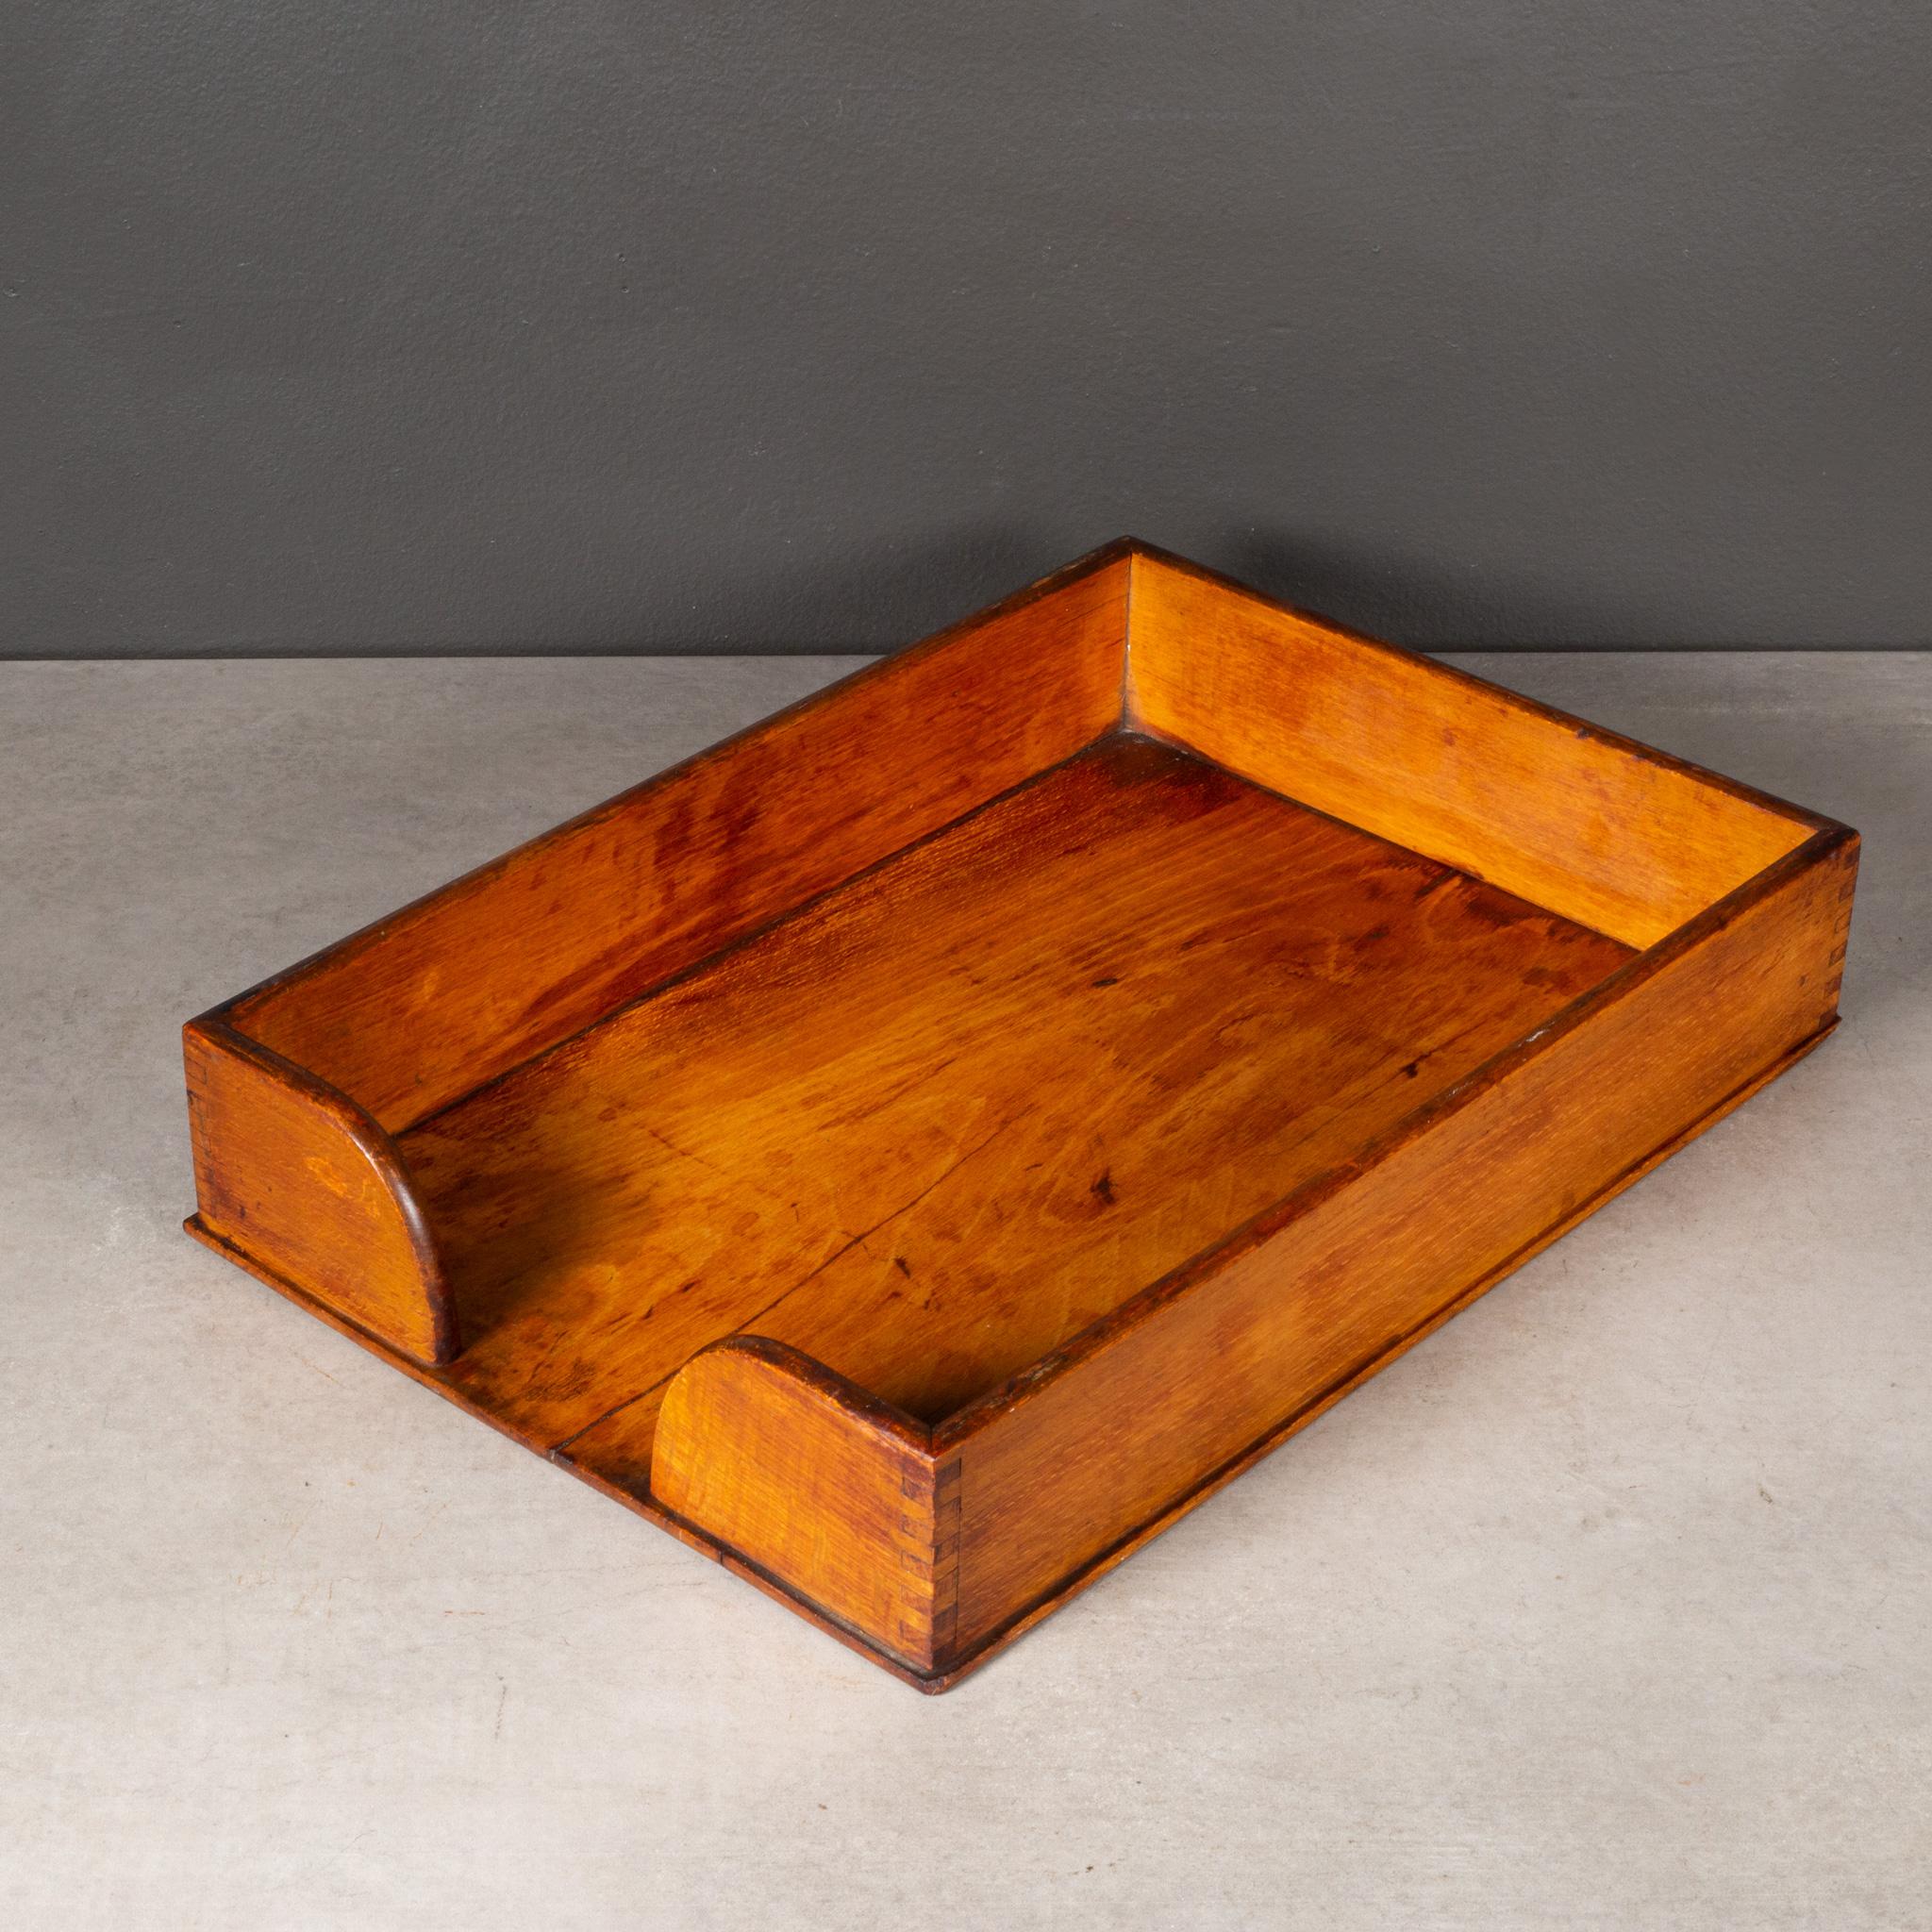 ABOUT

An antique wooden office tray constructed with dovetail joints. This piece has retained its original finish and has the appropriate patina for the age and use.

    CREATOR Unknown.
    DATE OF MANUFACTURE c.1930-1940.
    MATERIALS AND